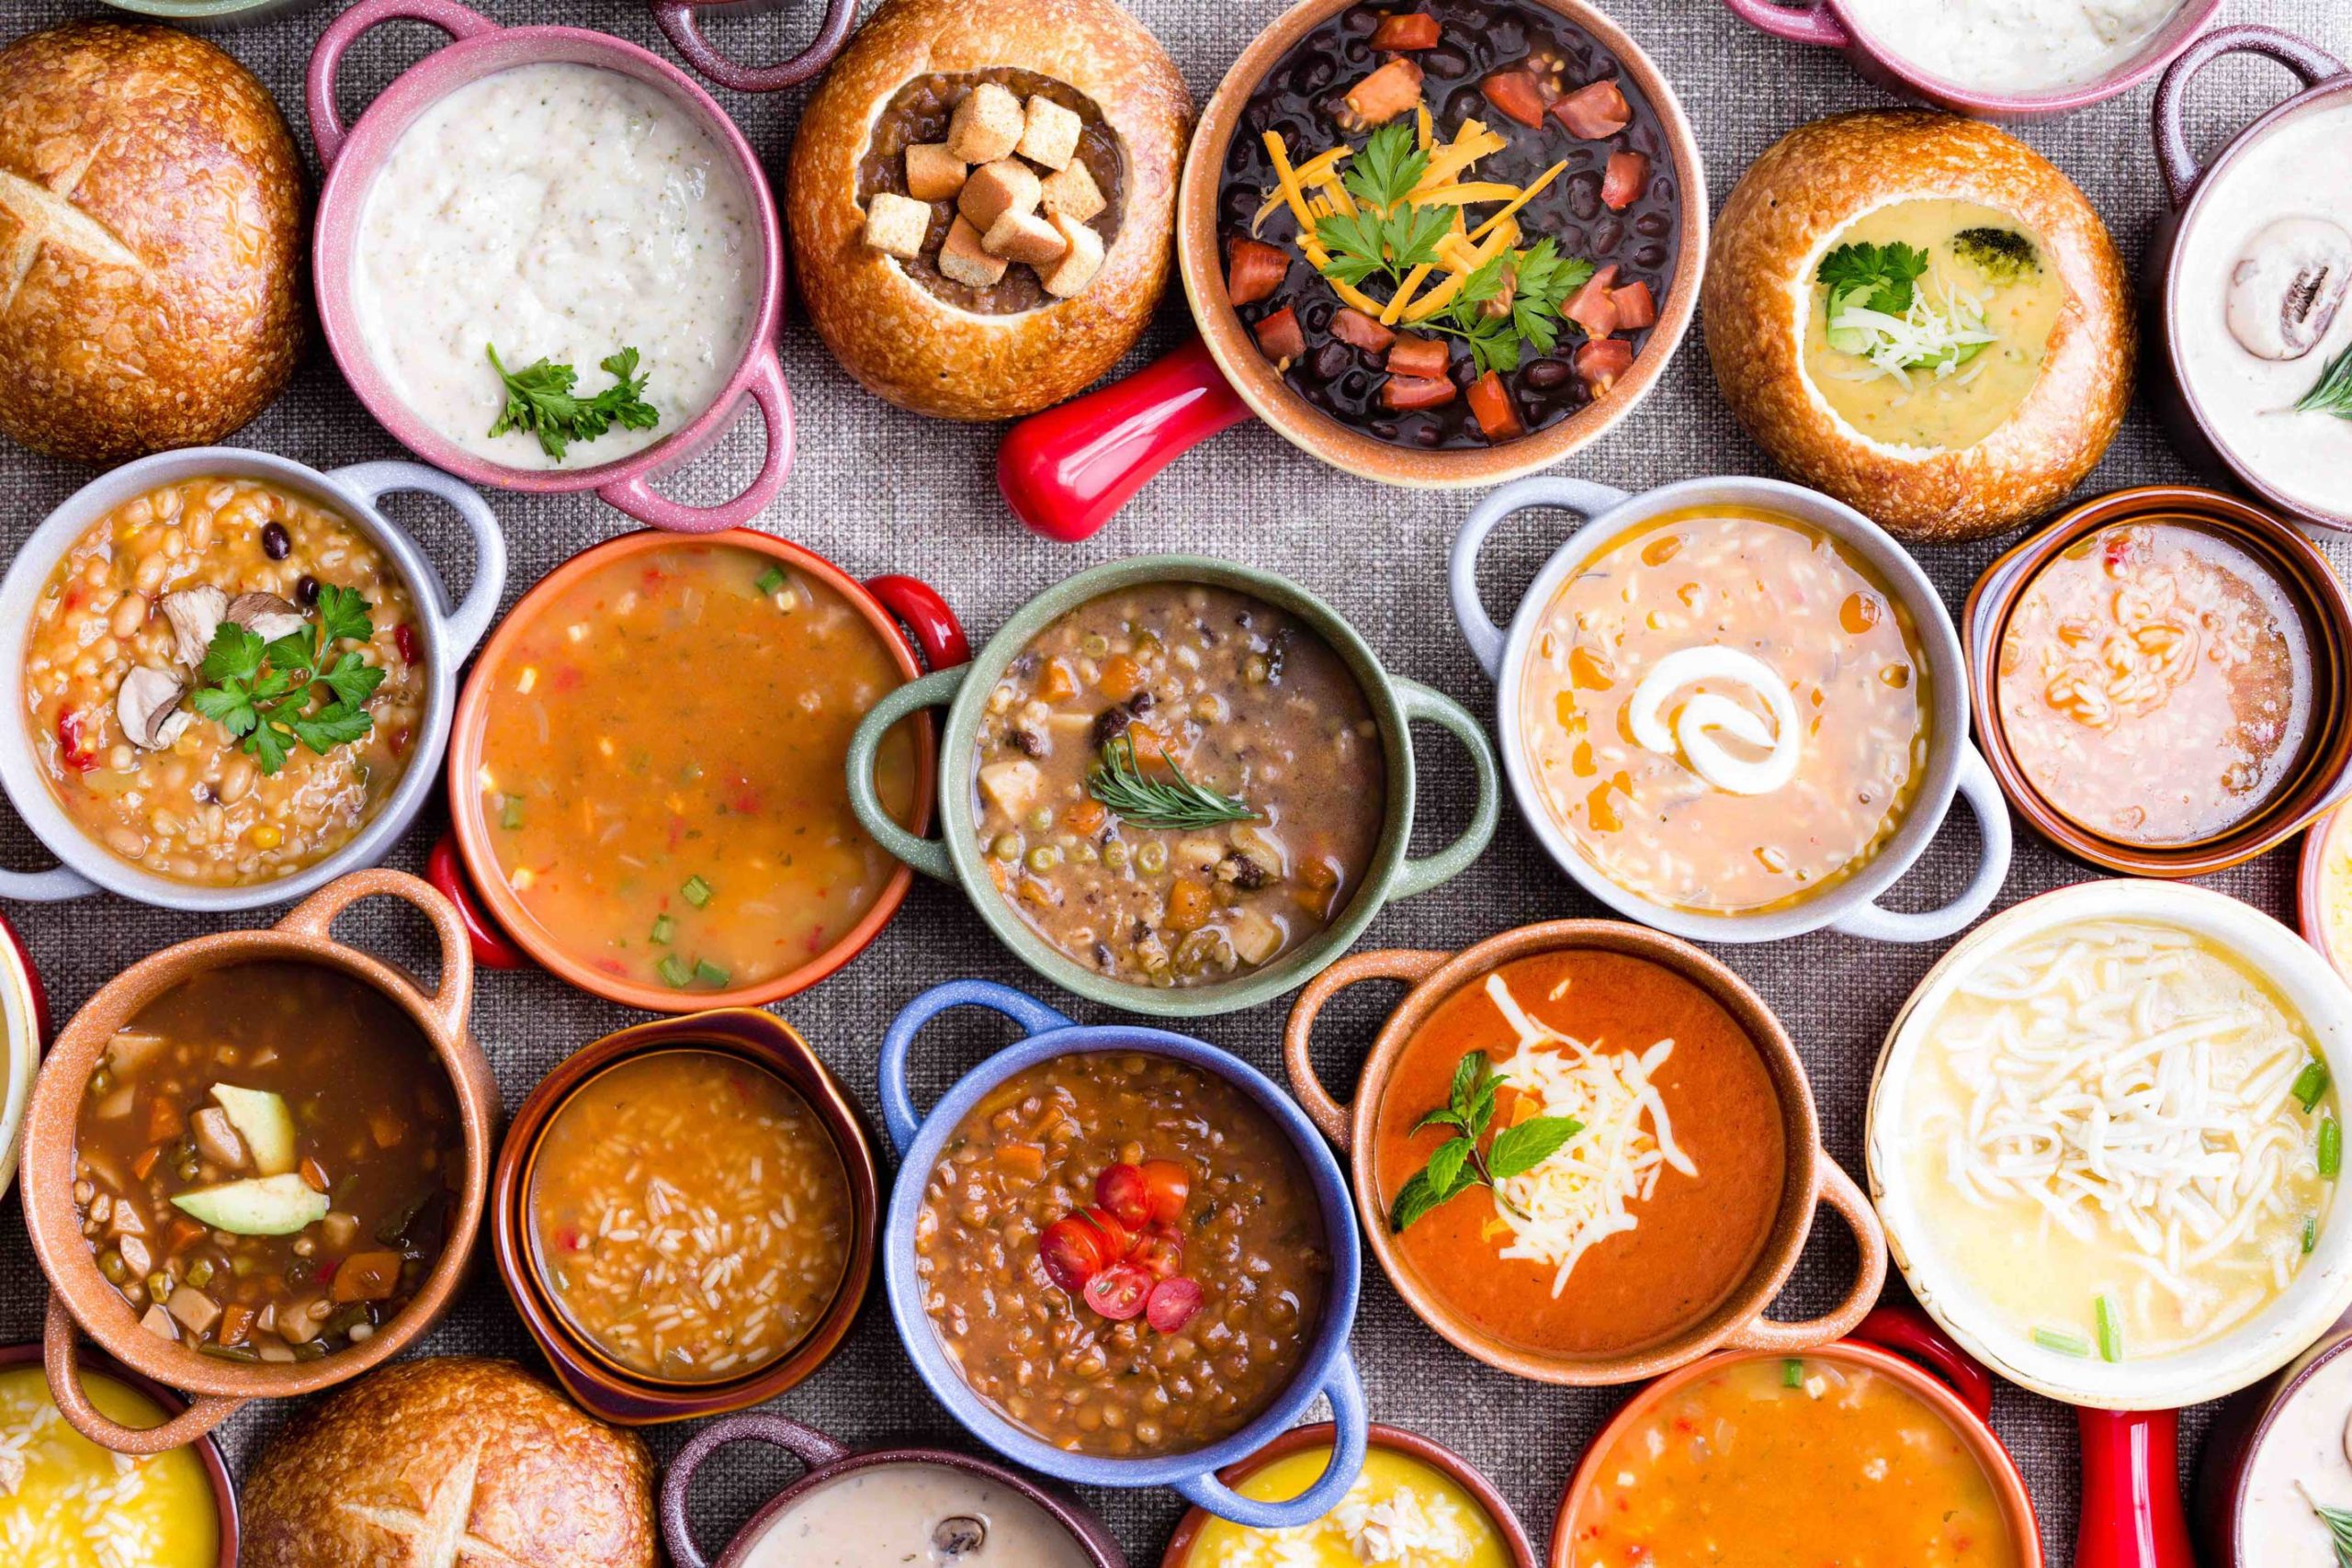 Many different curries in bowls